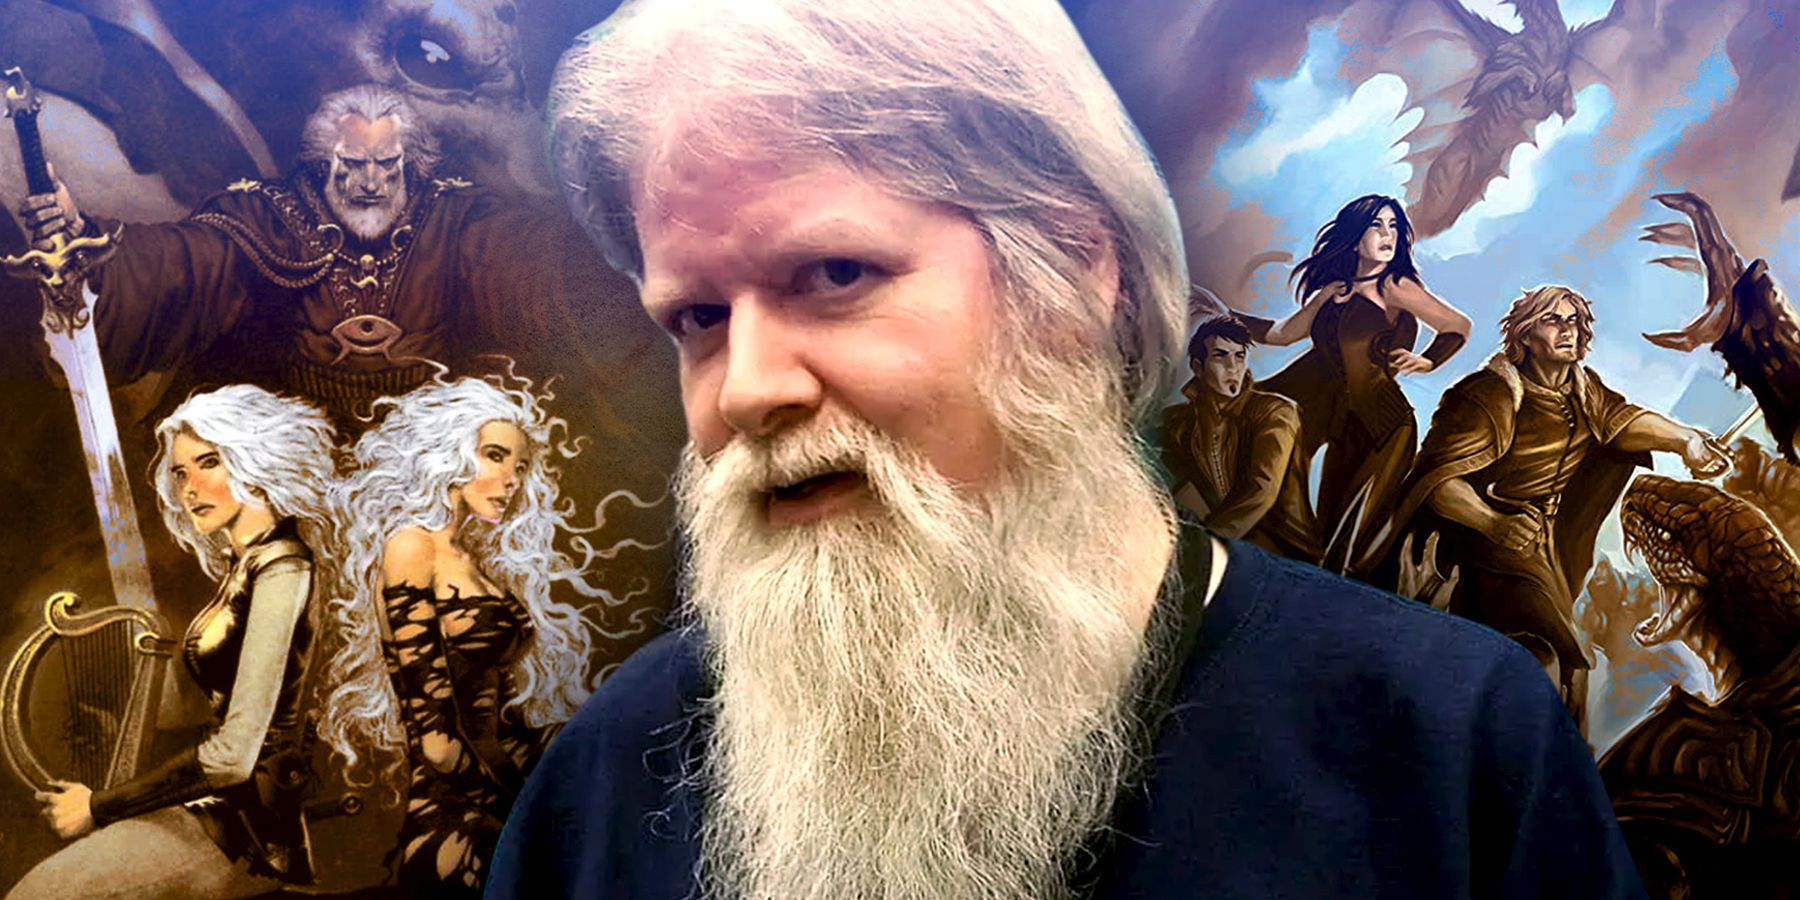 Dnd images behid a picture of Forgotten Realms creator Ed Greenwood.